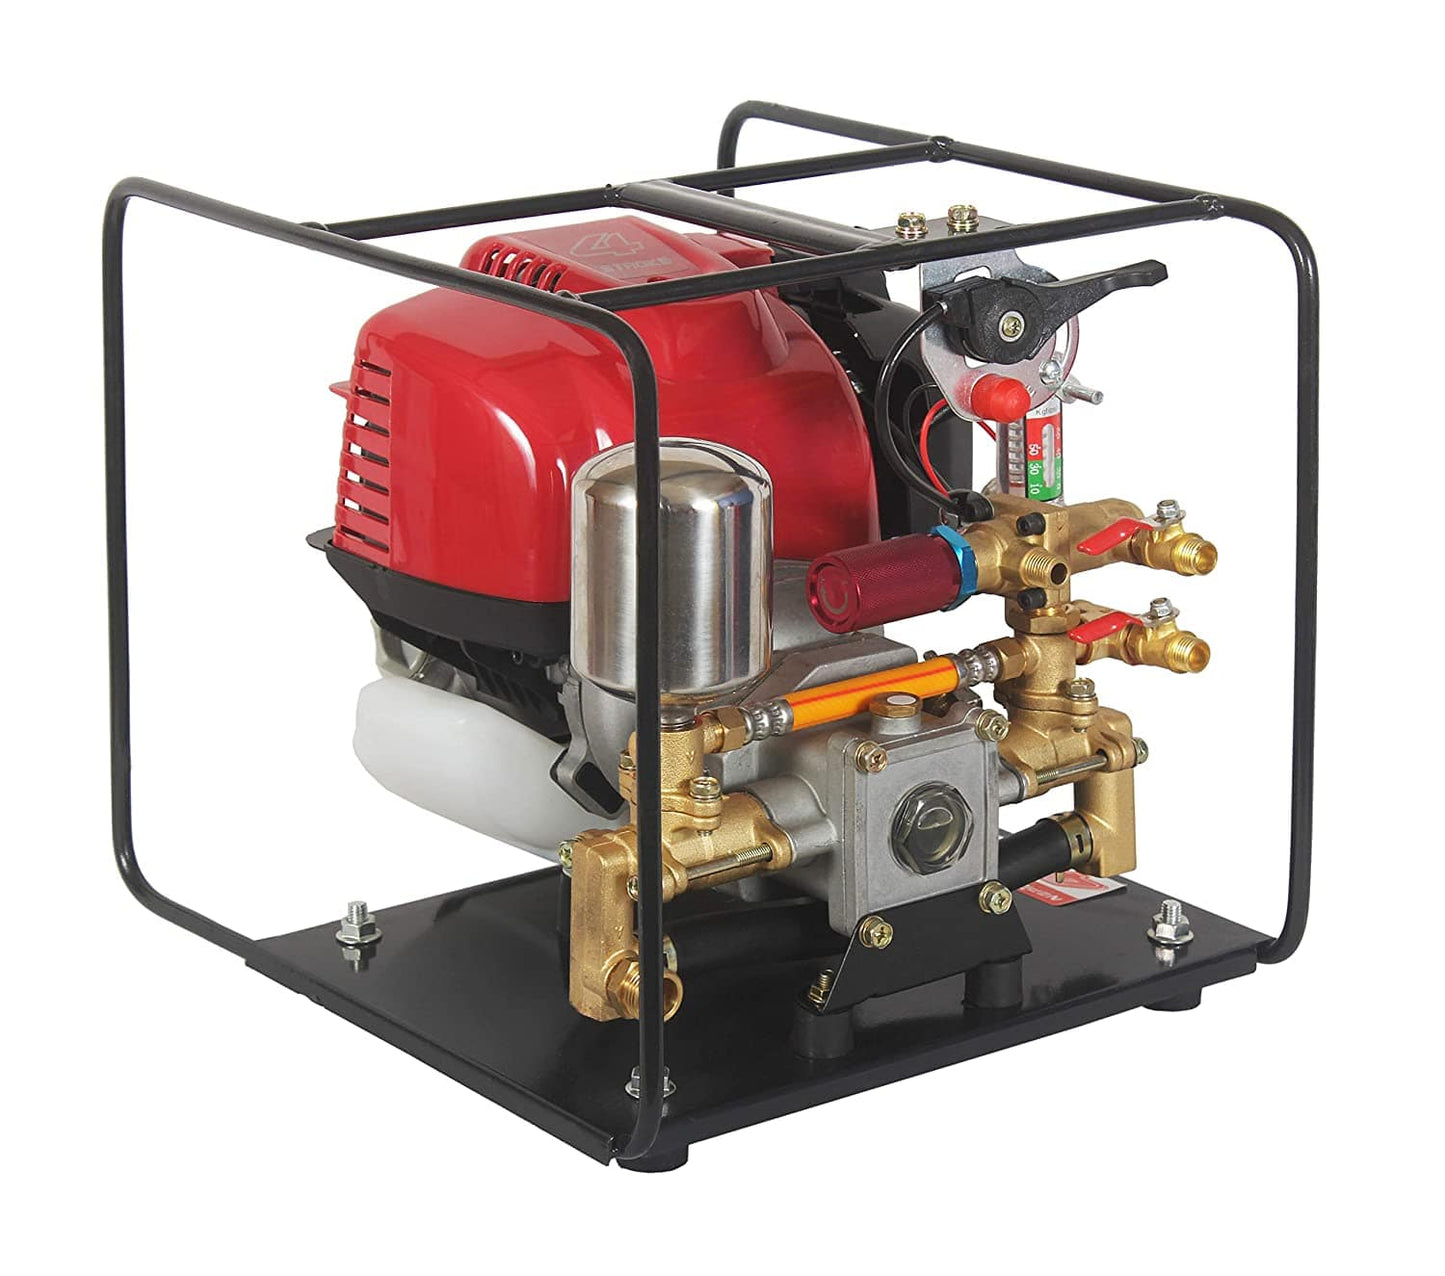 Neptune Simplify Farming Portable Power Sprayer 4 Stroke Engine Technology Brass Pressure Pump with Double Discharge Outlet NPW-50